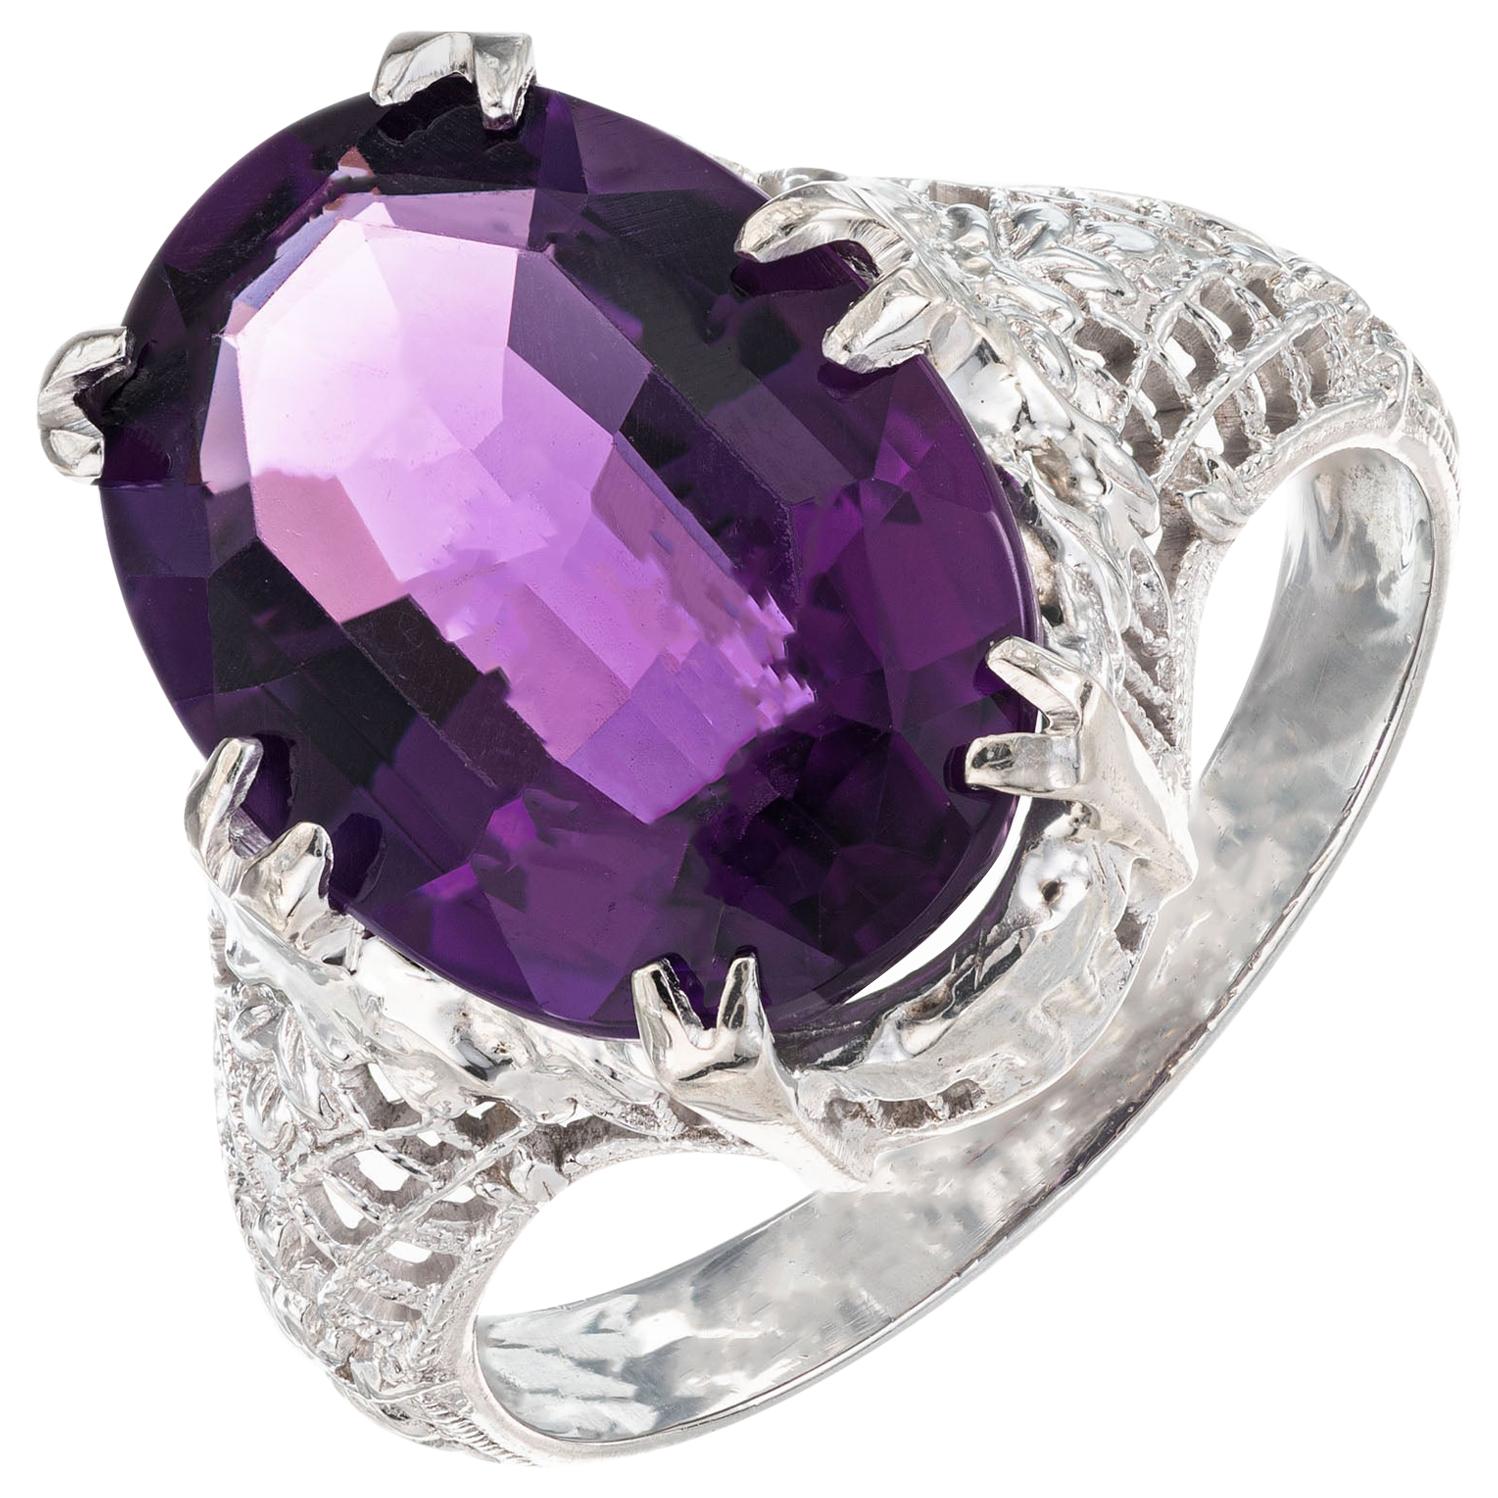 5.00 Carat Oval Bright Purple Amethyst Filigree Gold Ring For Sale